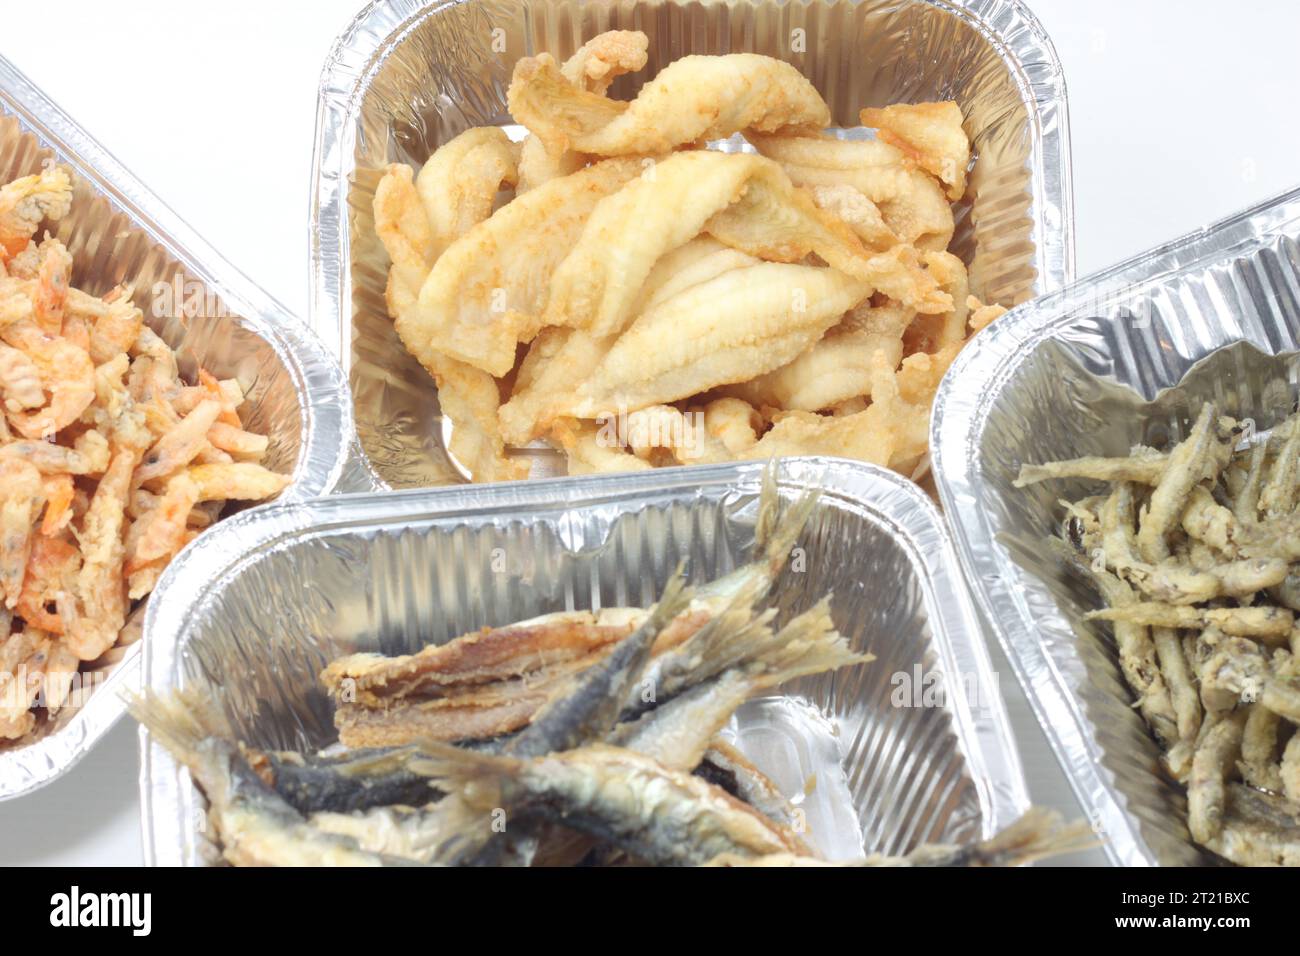 A closeup of fish in tinfoil containers on a white background Stock Photo